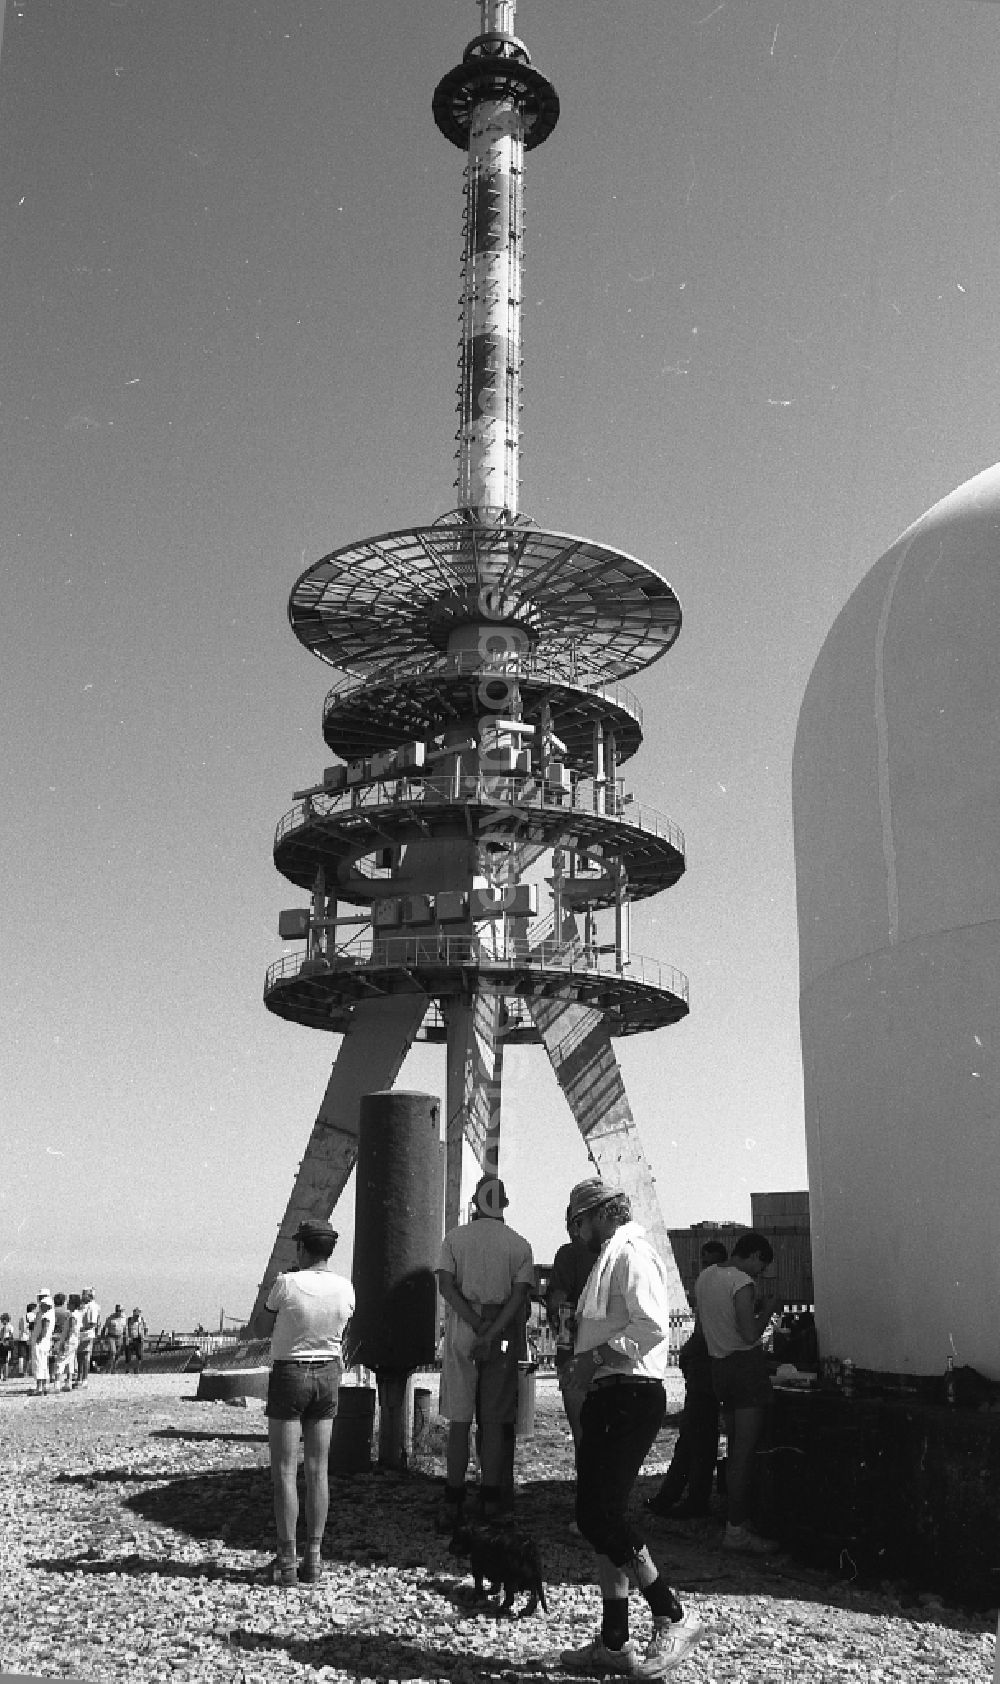 GDR image archive: Schierke - Transmission and radio technology - military technology of the GSSD - Red Army on the summit of the Brocken Plateau during the first visit by civilians in Schierke in the state of Saxony-Anhalt in the area of the former GDR, German Democratic Republic